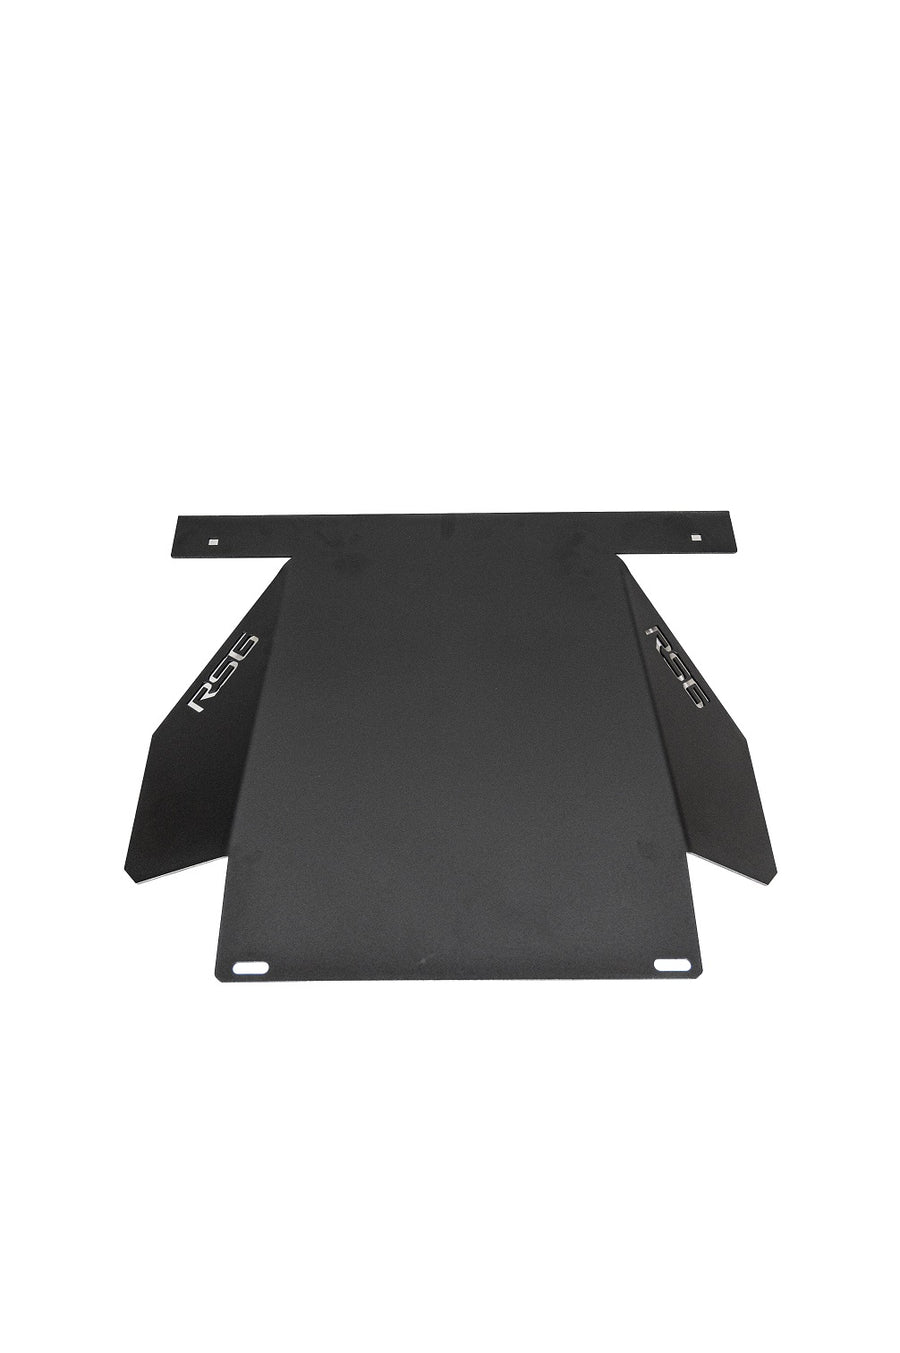 2010+ Toyota 4Runner Cat Skid Guard (Works with All Toyota Front Skid Plates) - RSG METALWORKS